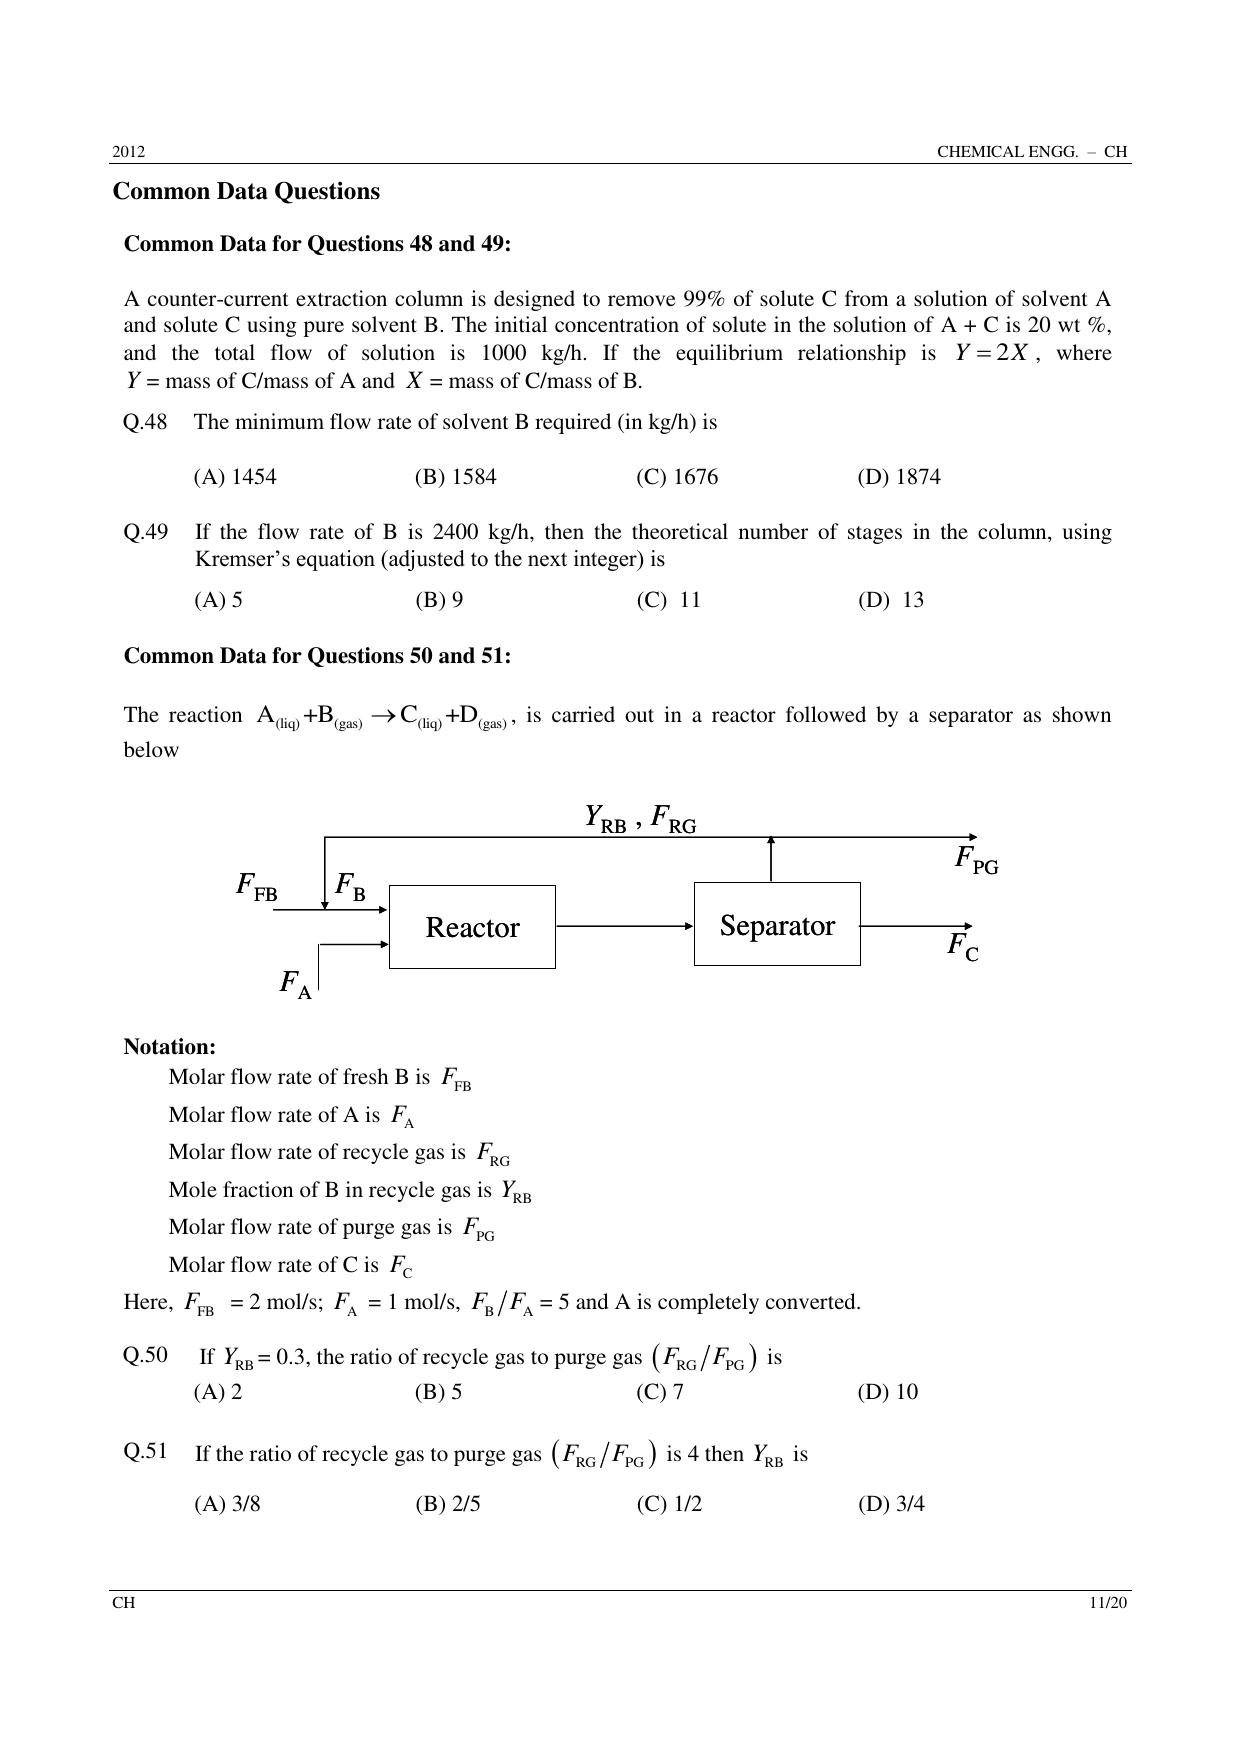 GATE 2012 Chemical Engineering (CH) Question Paper with Answer Key - Page 11